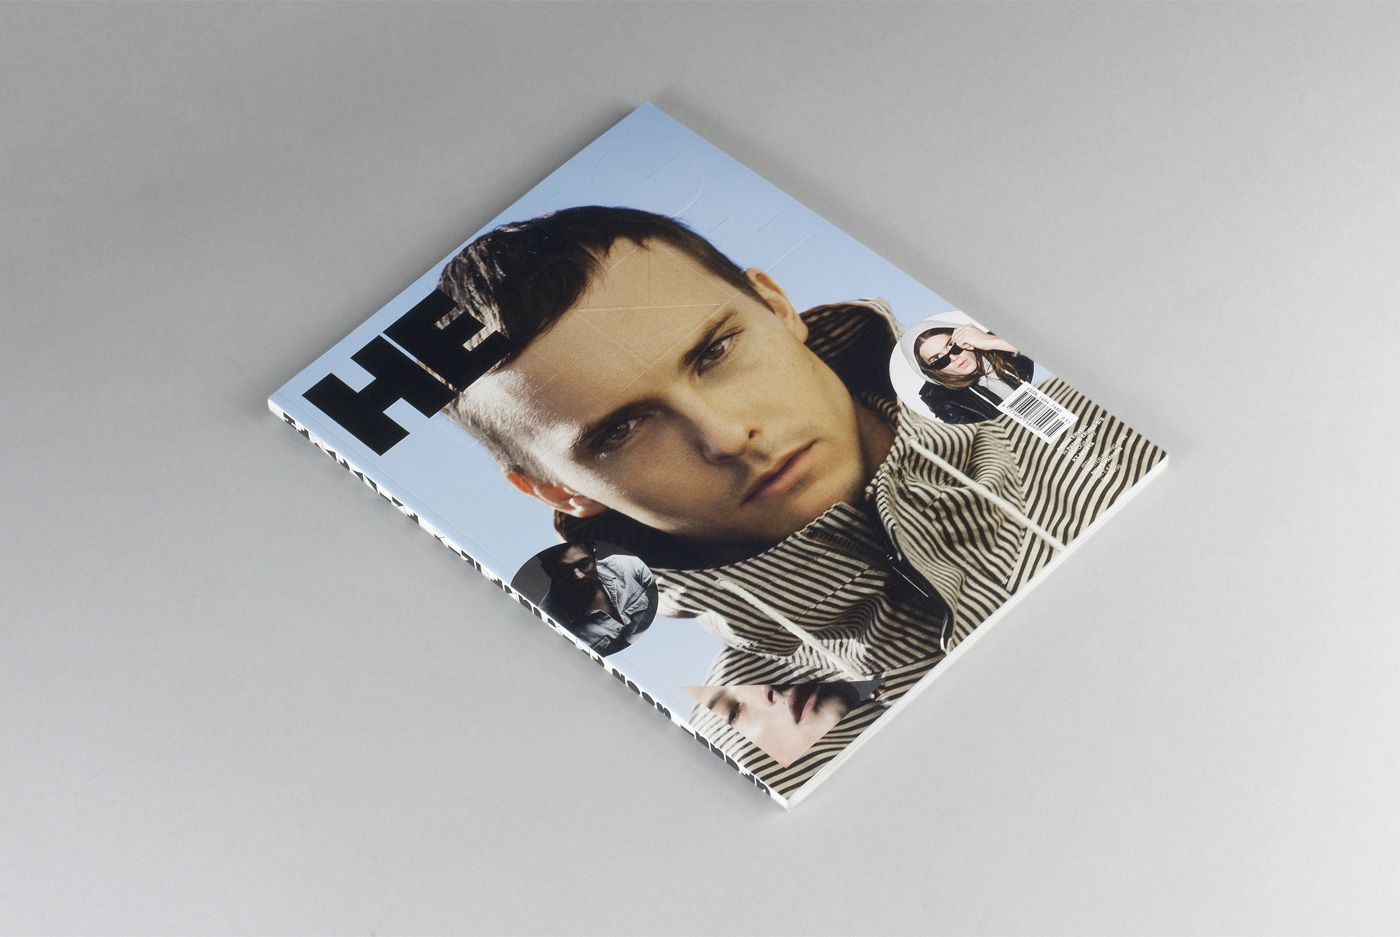 HE magazine – Issue 05 art direction and design